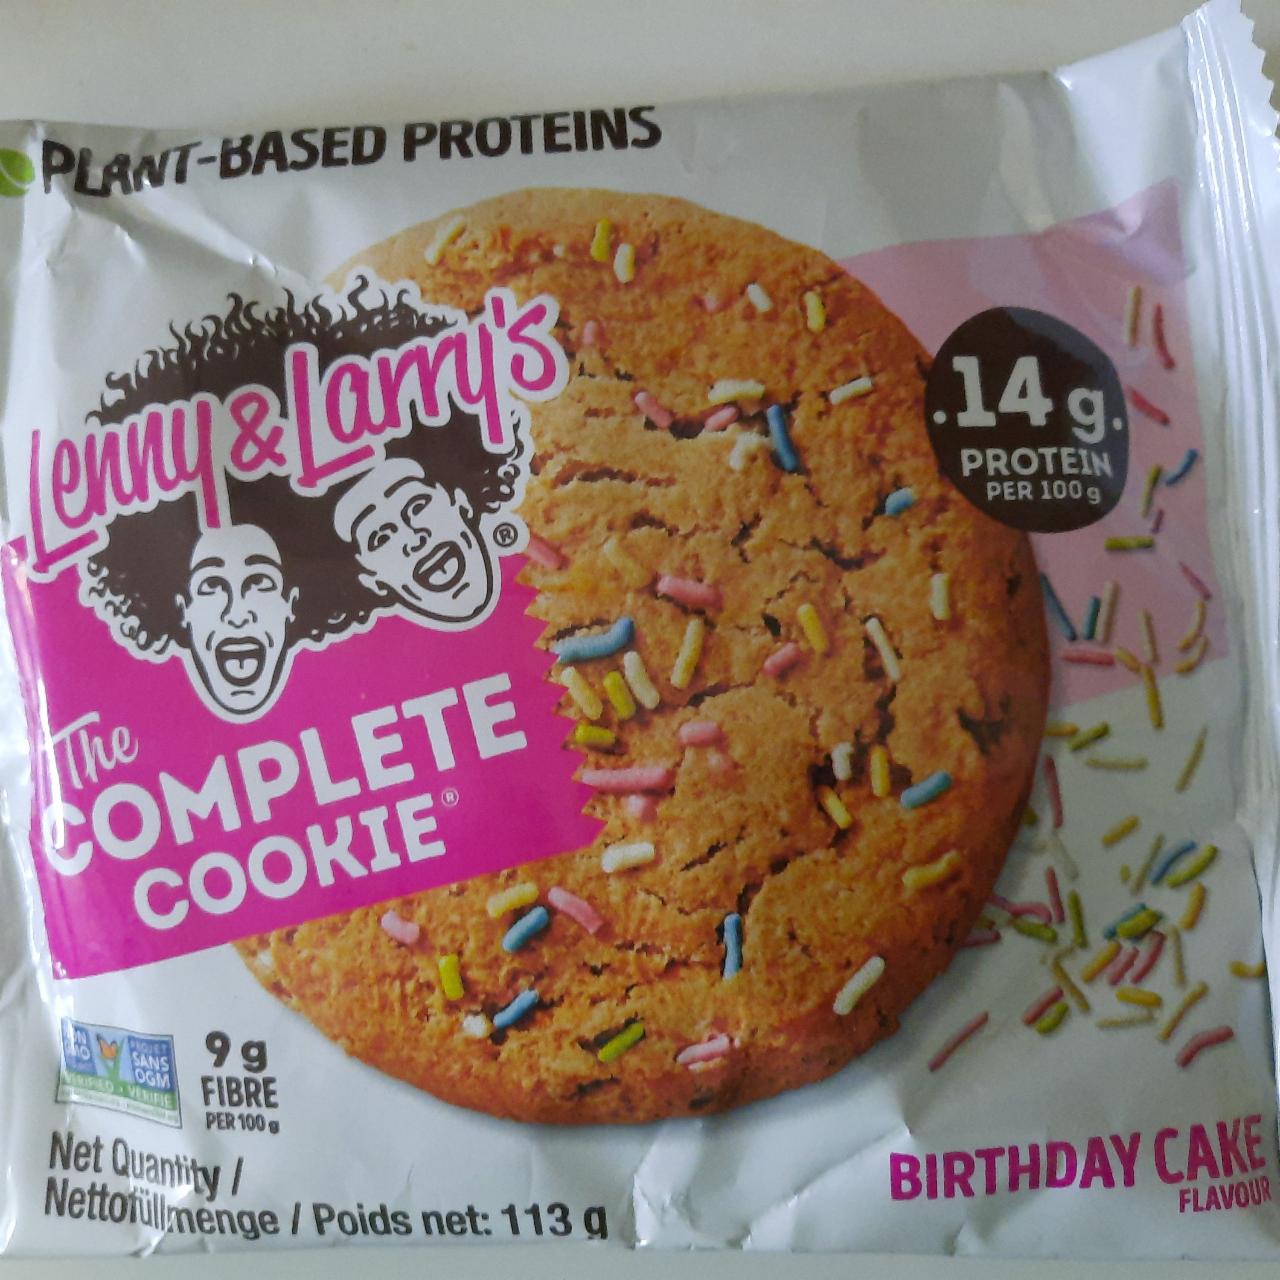 Fotografie - The complete cookie birthday cake 14g protein Lenny&Larry's